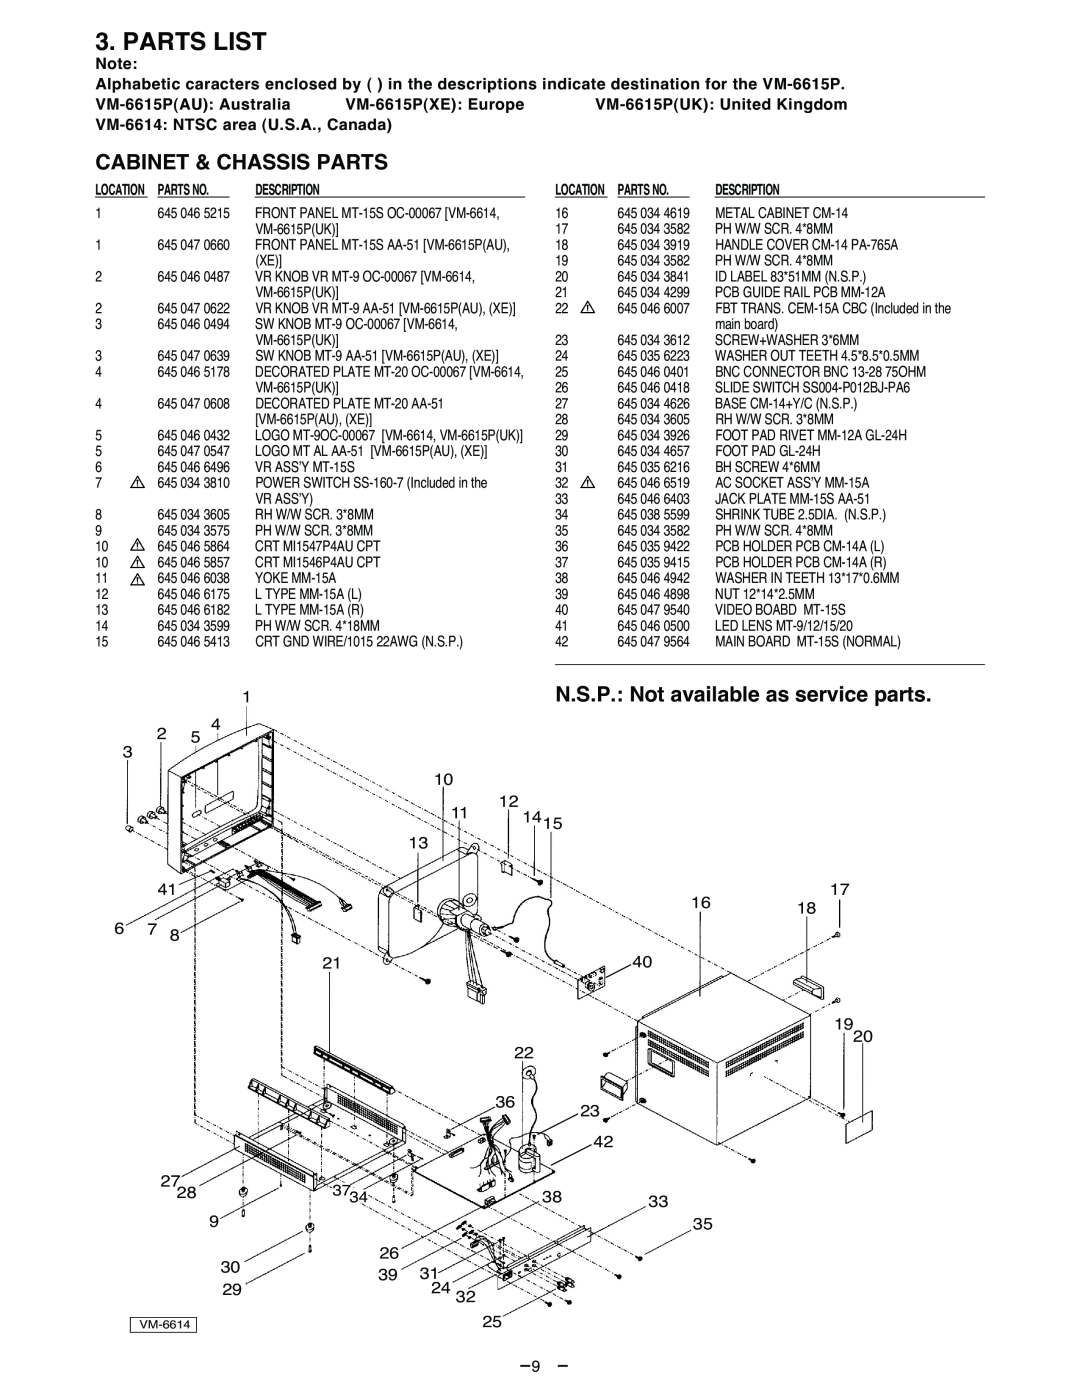 Sanyo Parts List, Cabinet & Chassis Parts, N.S.P. Not available as service parts, VM-6614 NTSC area U.S.A., Canada 